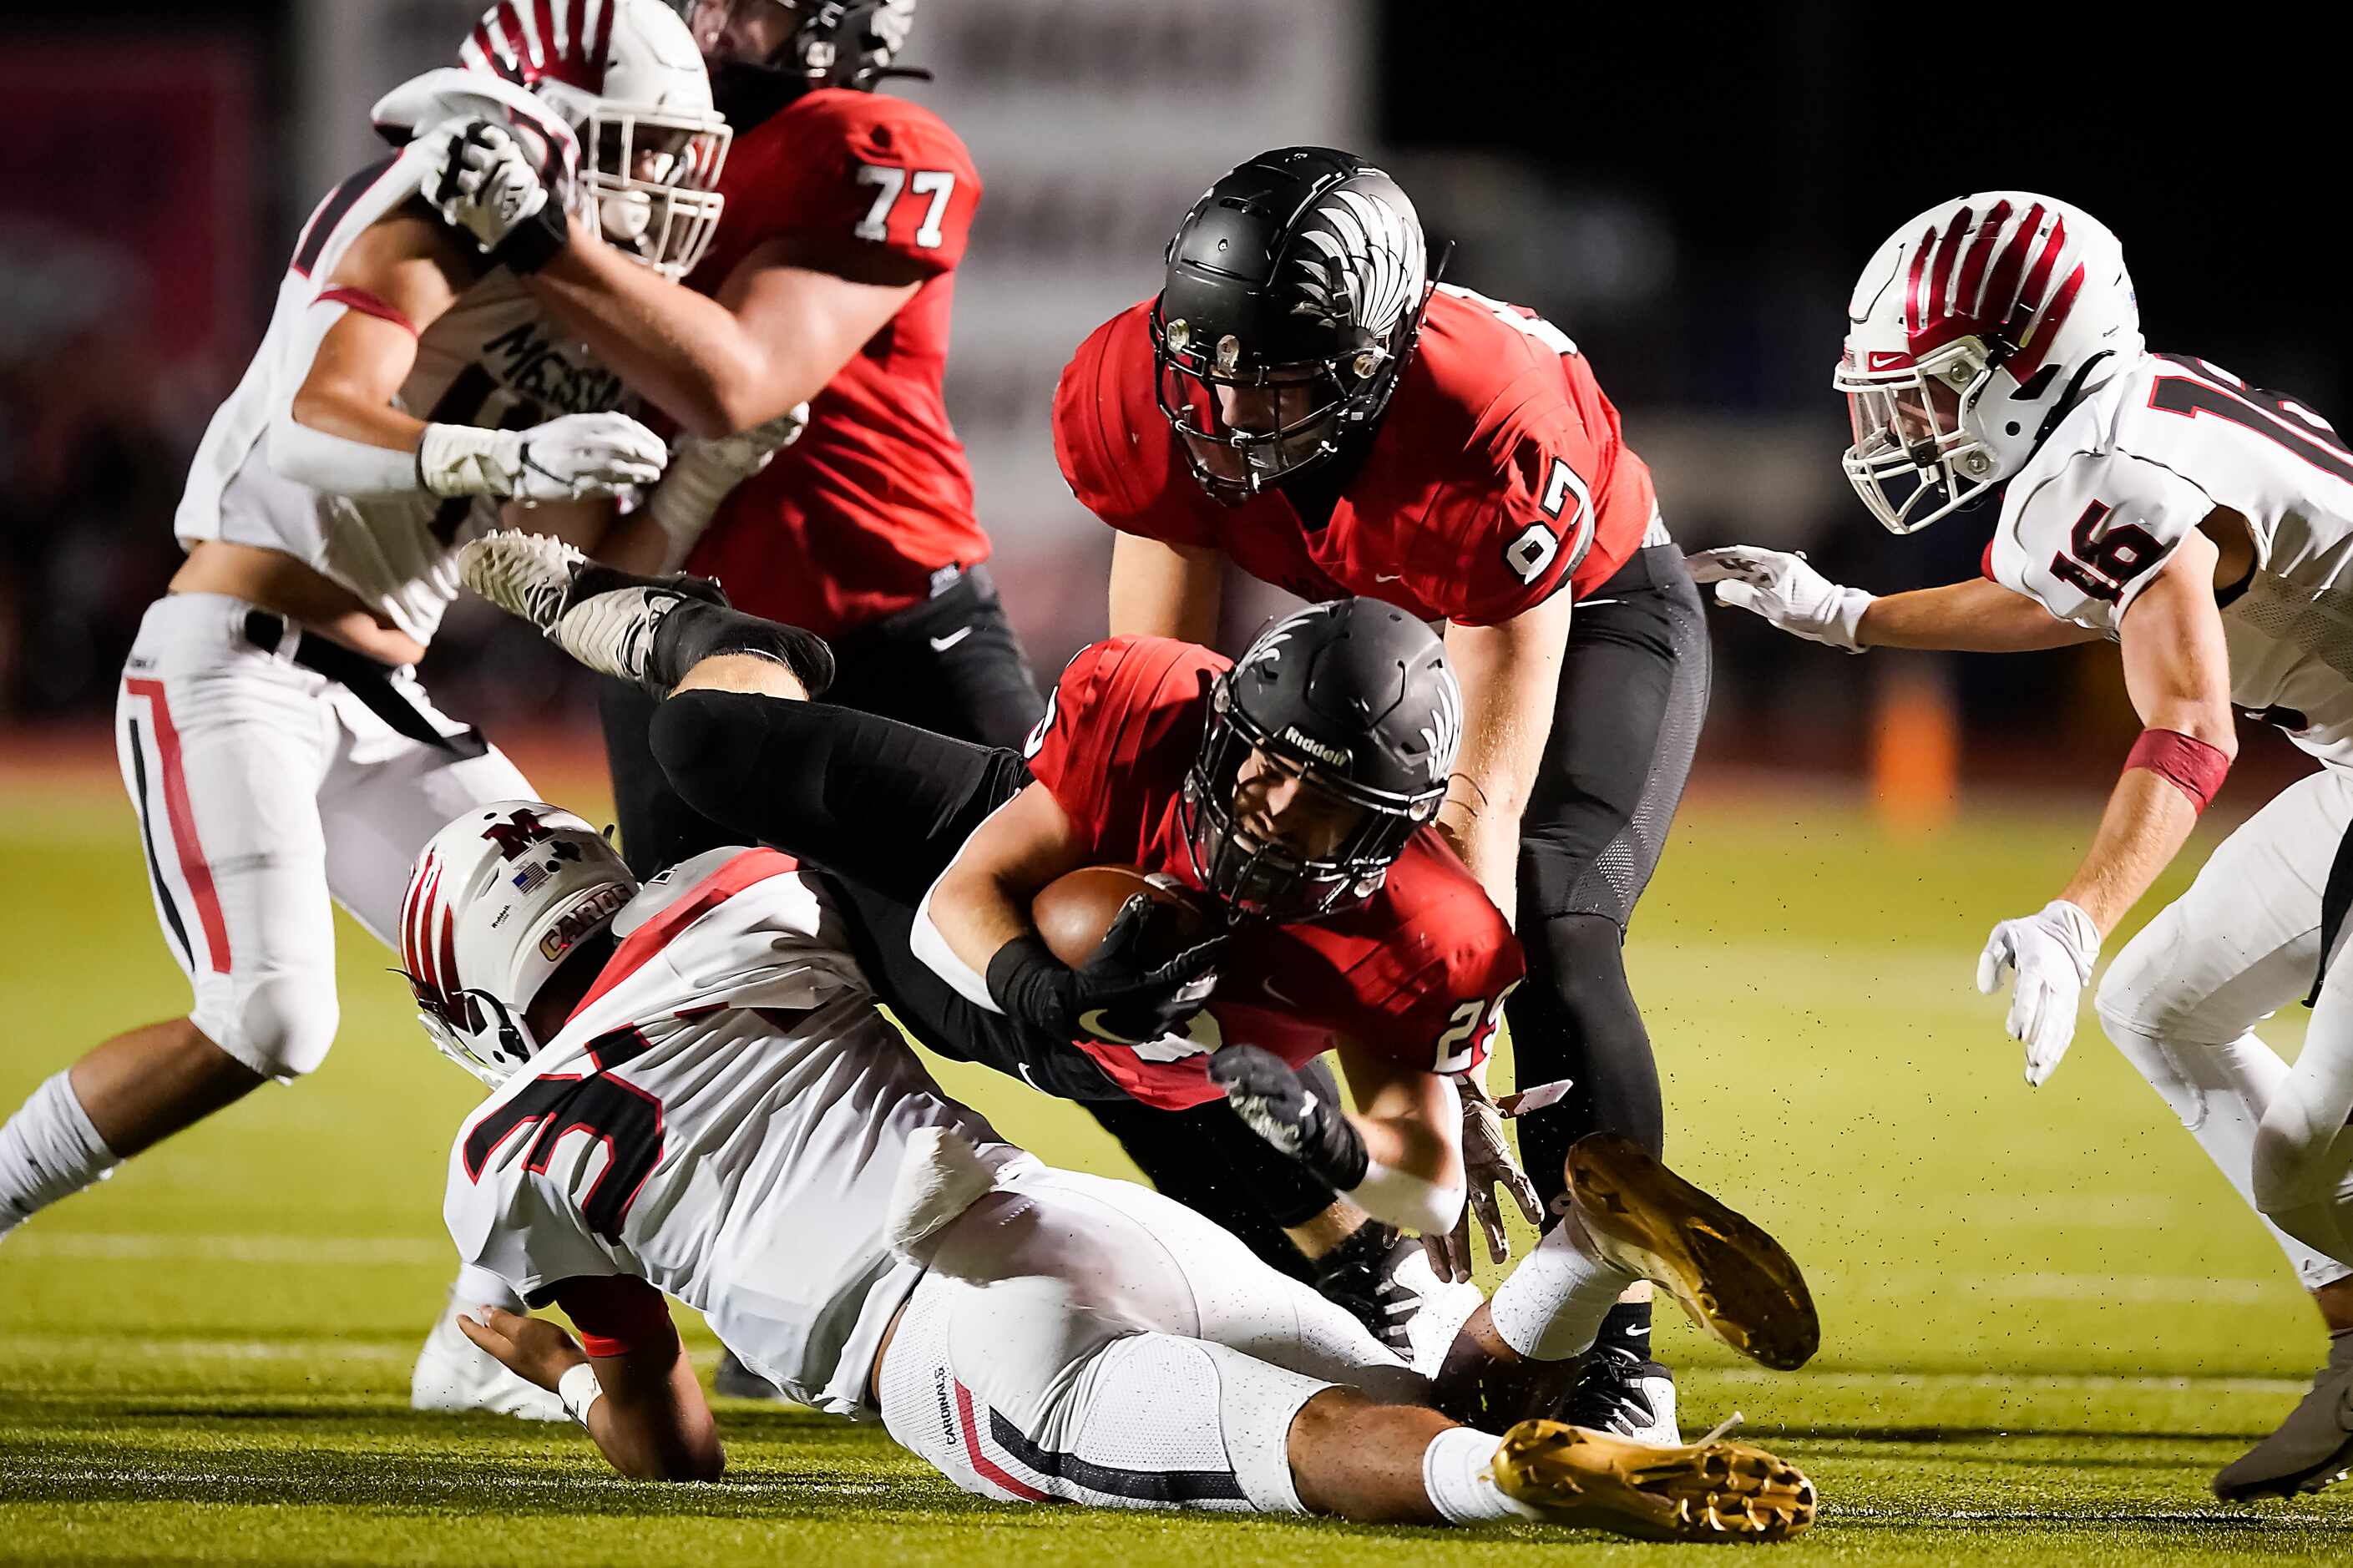 Argyle running back Braden Baker (29) is knocked off his feat by Melissa linebacker Caleb...